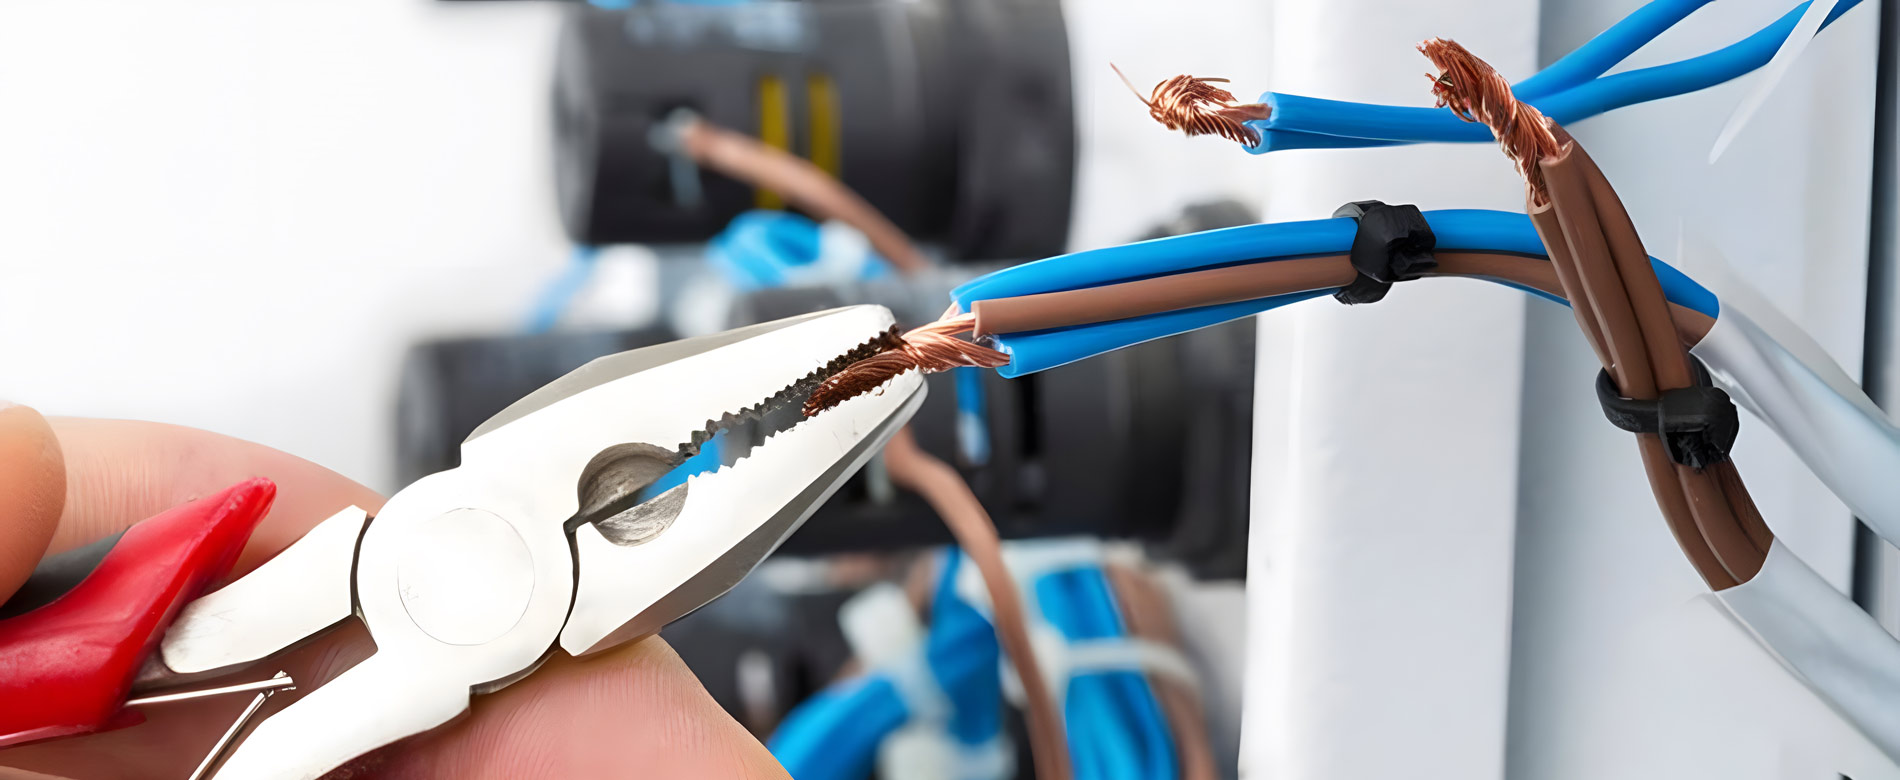 Ronaldson Electrical Construction | South Jersey Electrician & Electrical Services